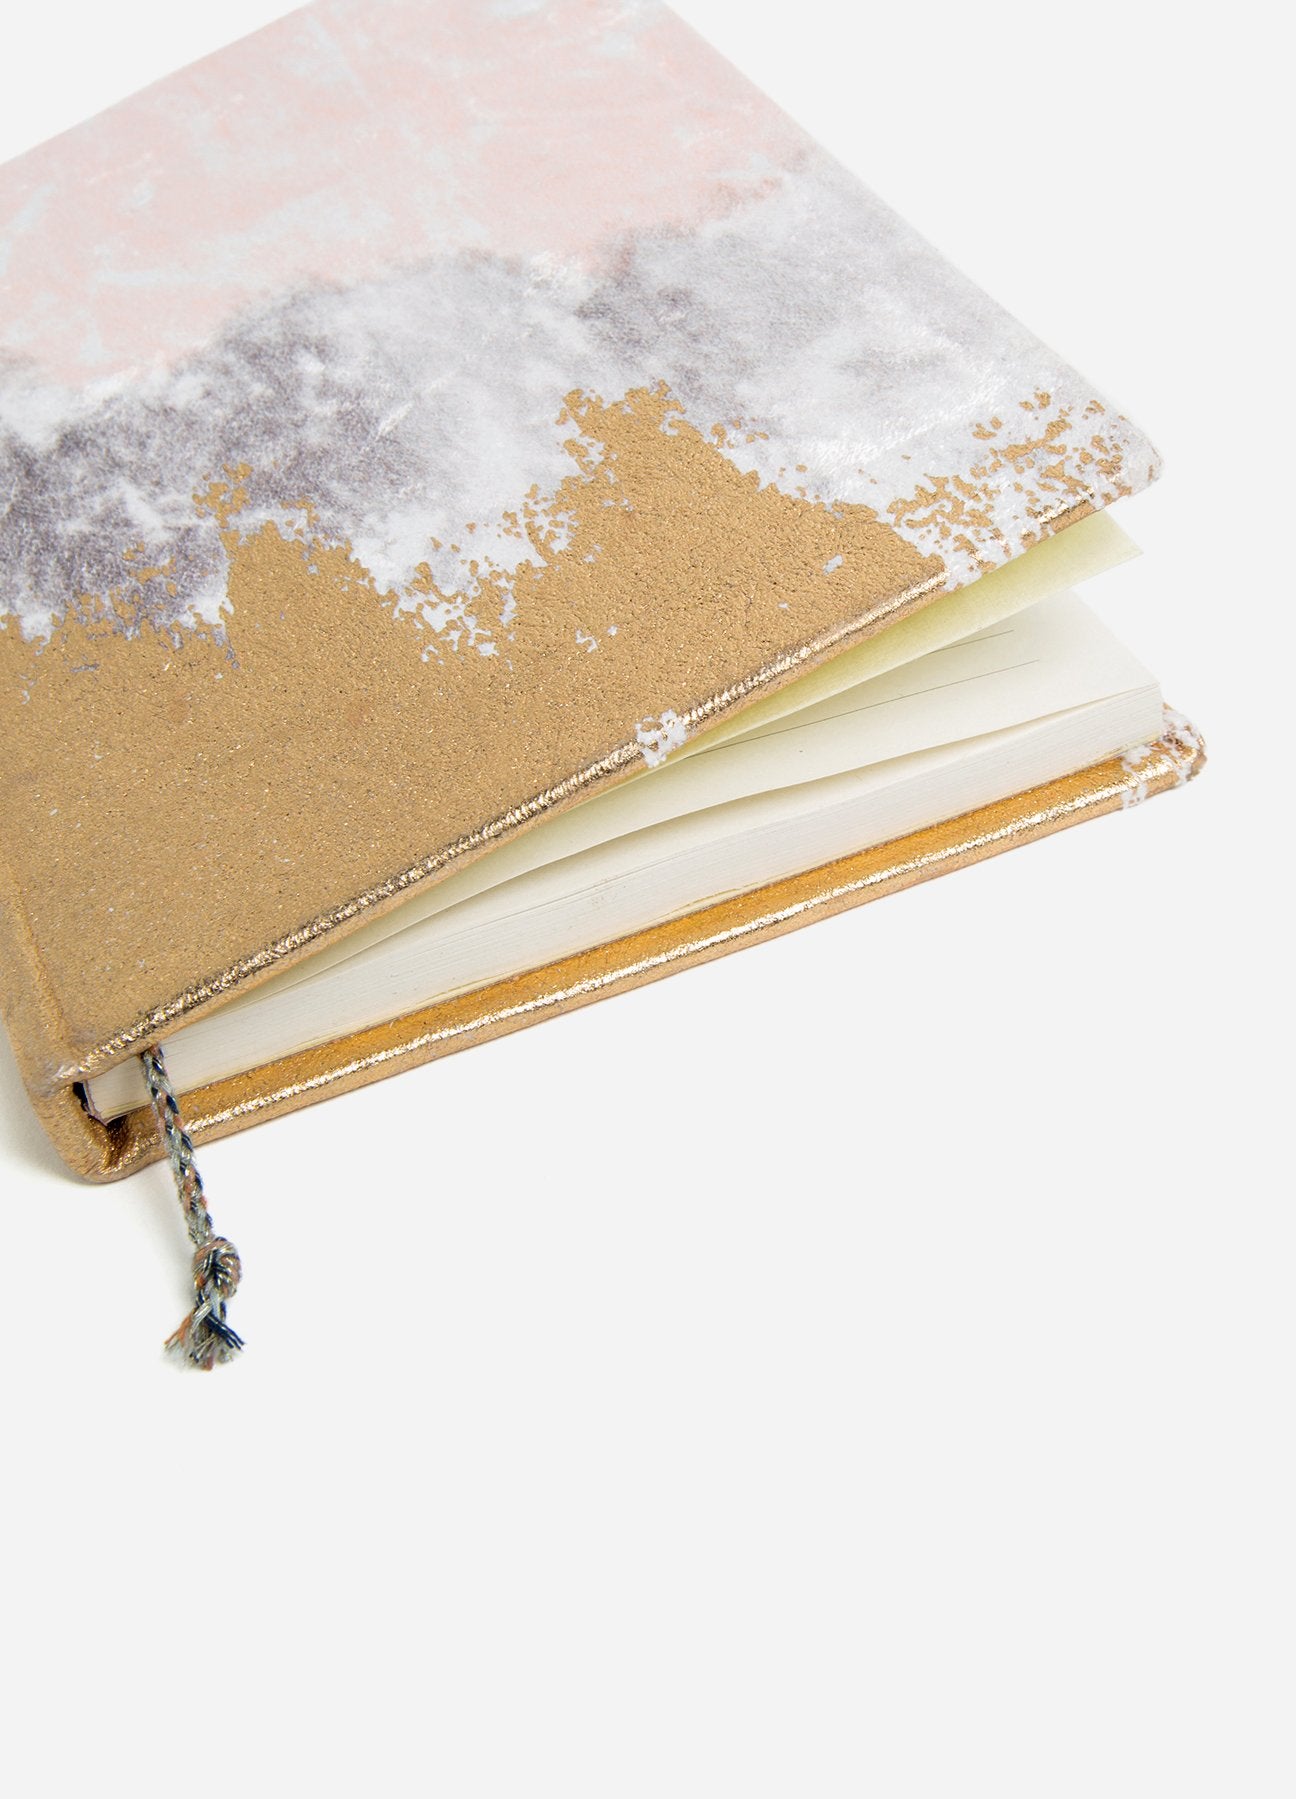 Blush Fade Guided Journal